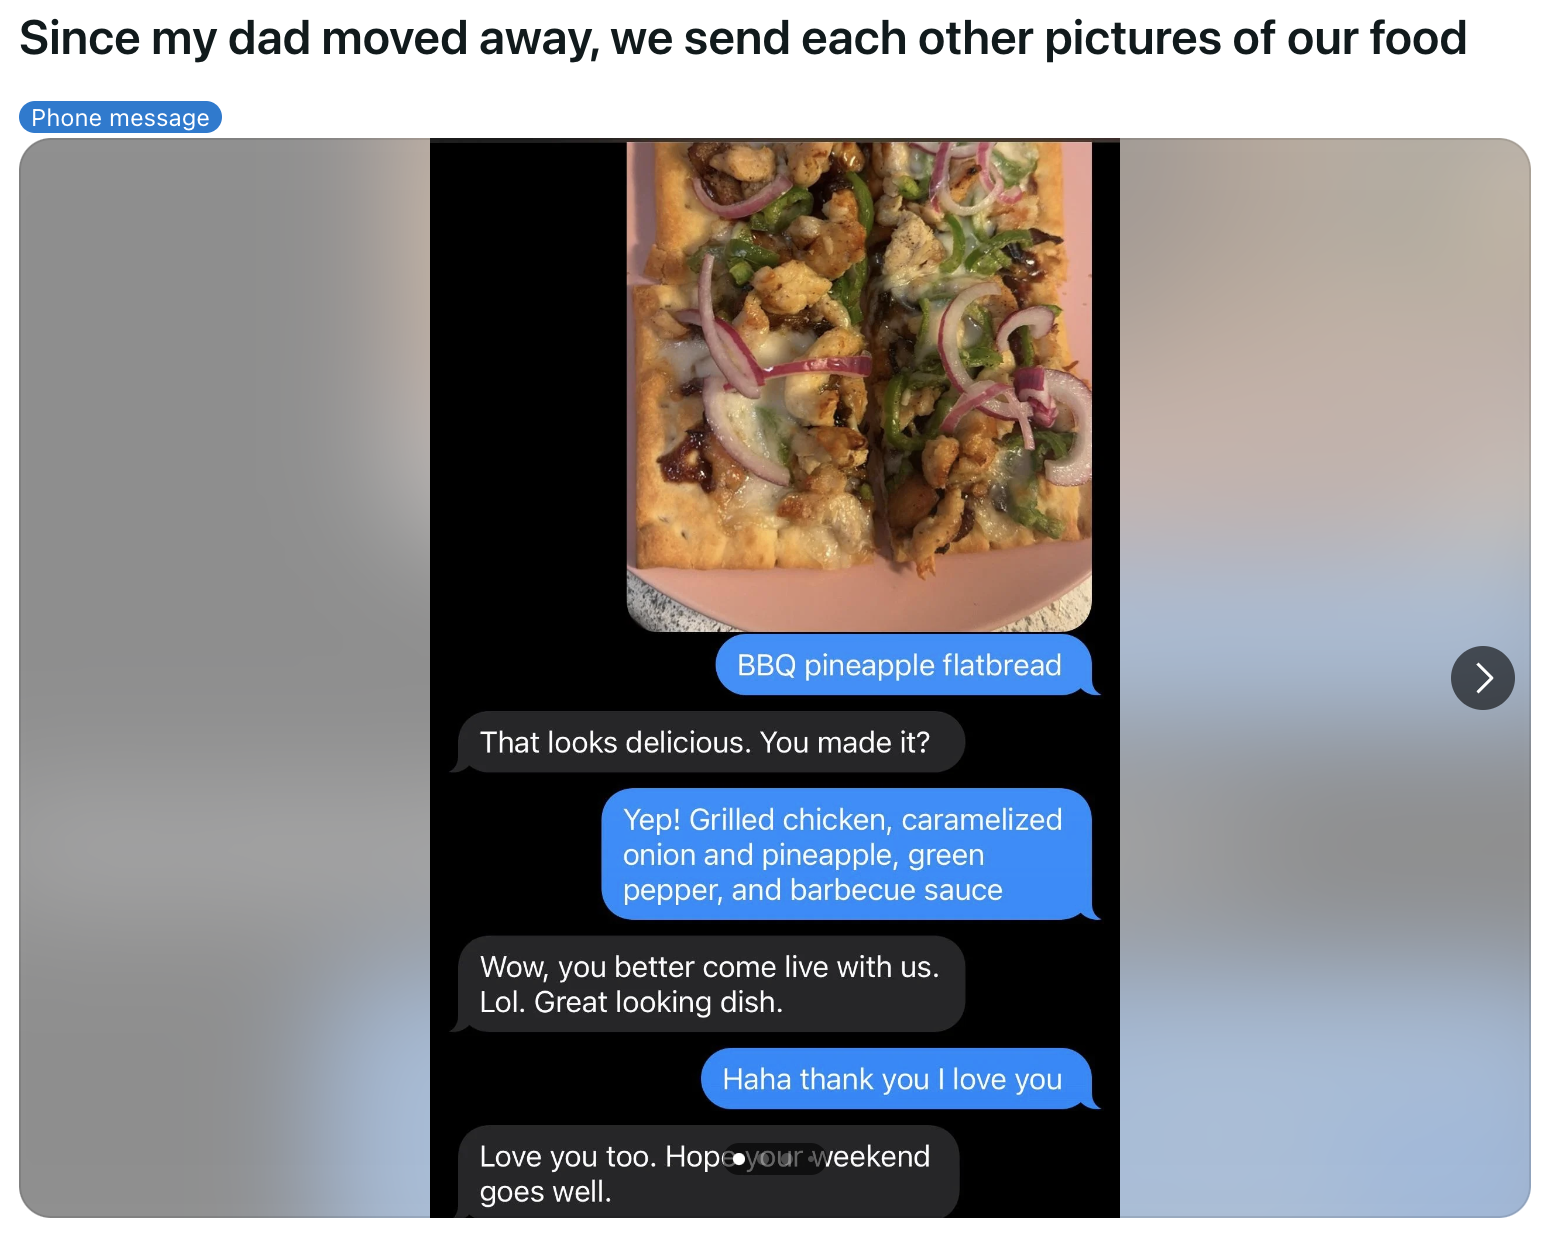 A screenshot of a text conversation sharing a photo of BBQ pineapple flatbread between parent and child